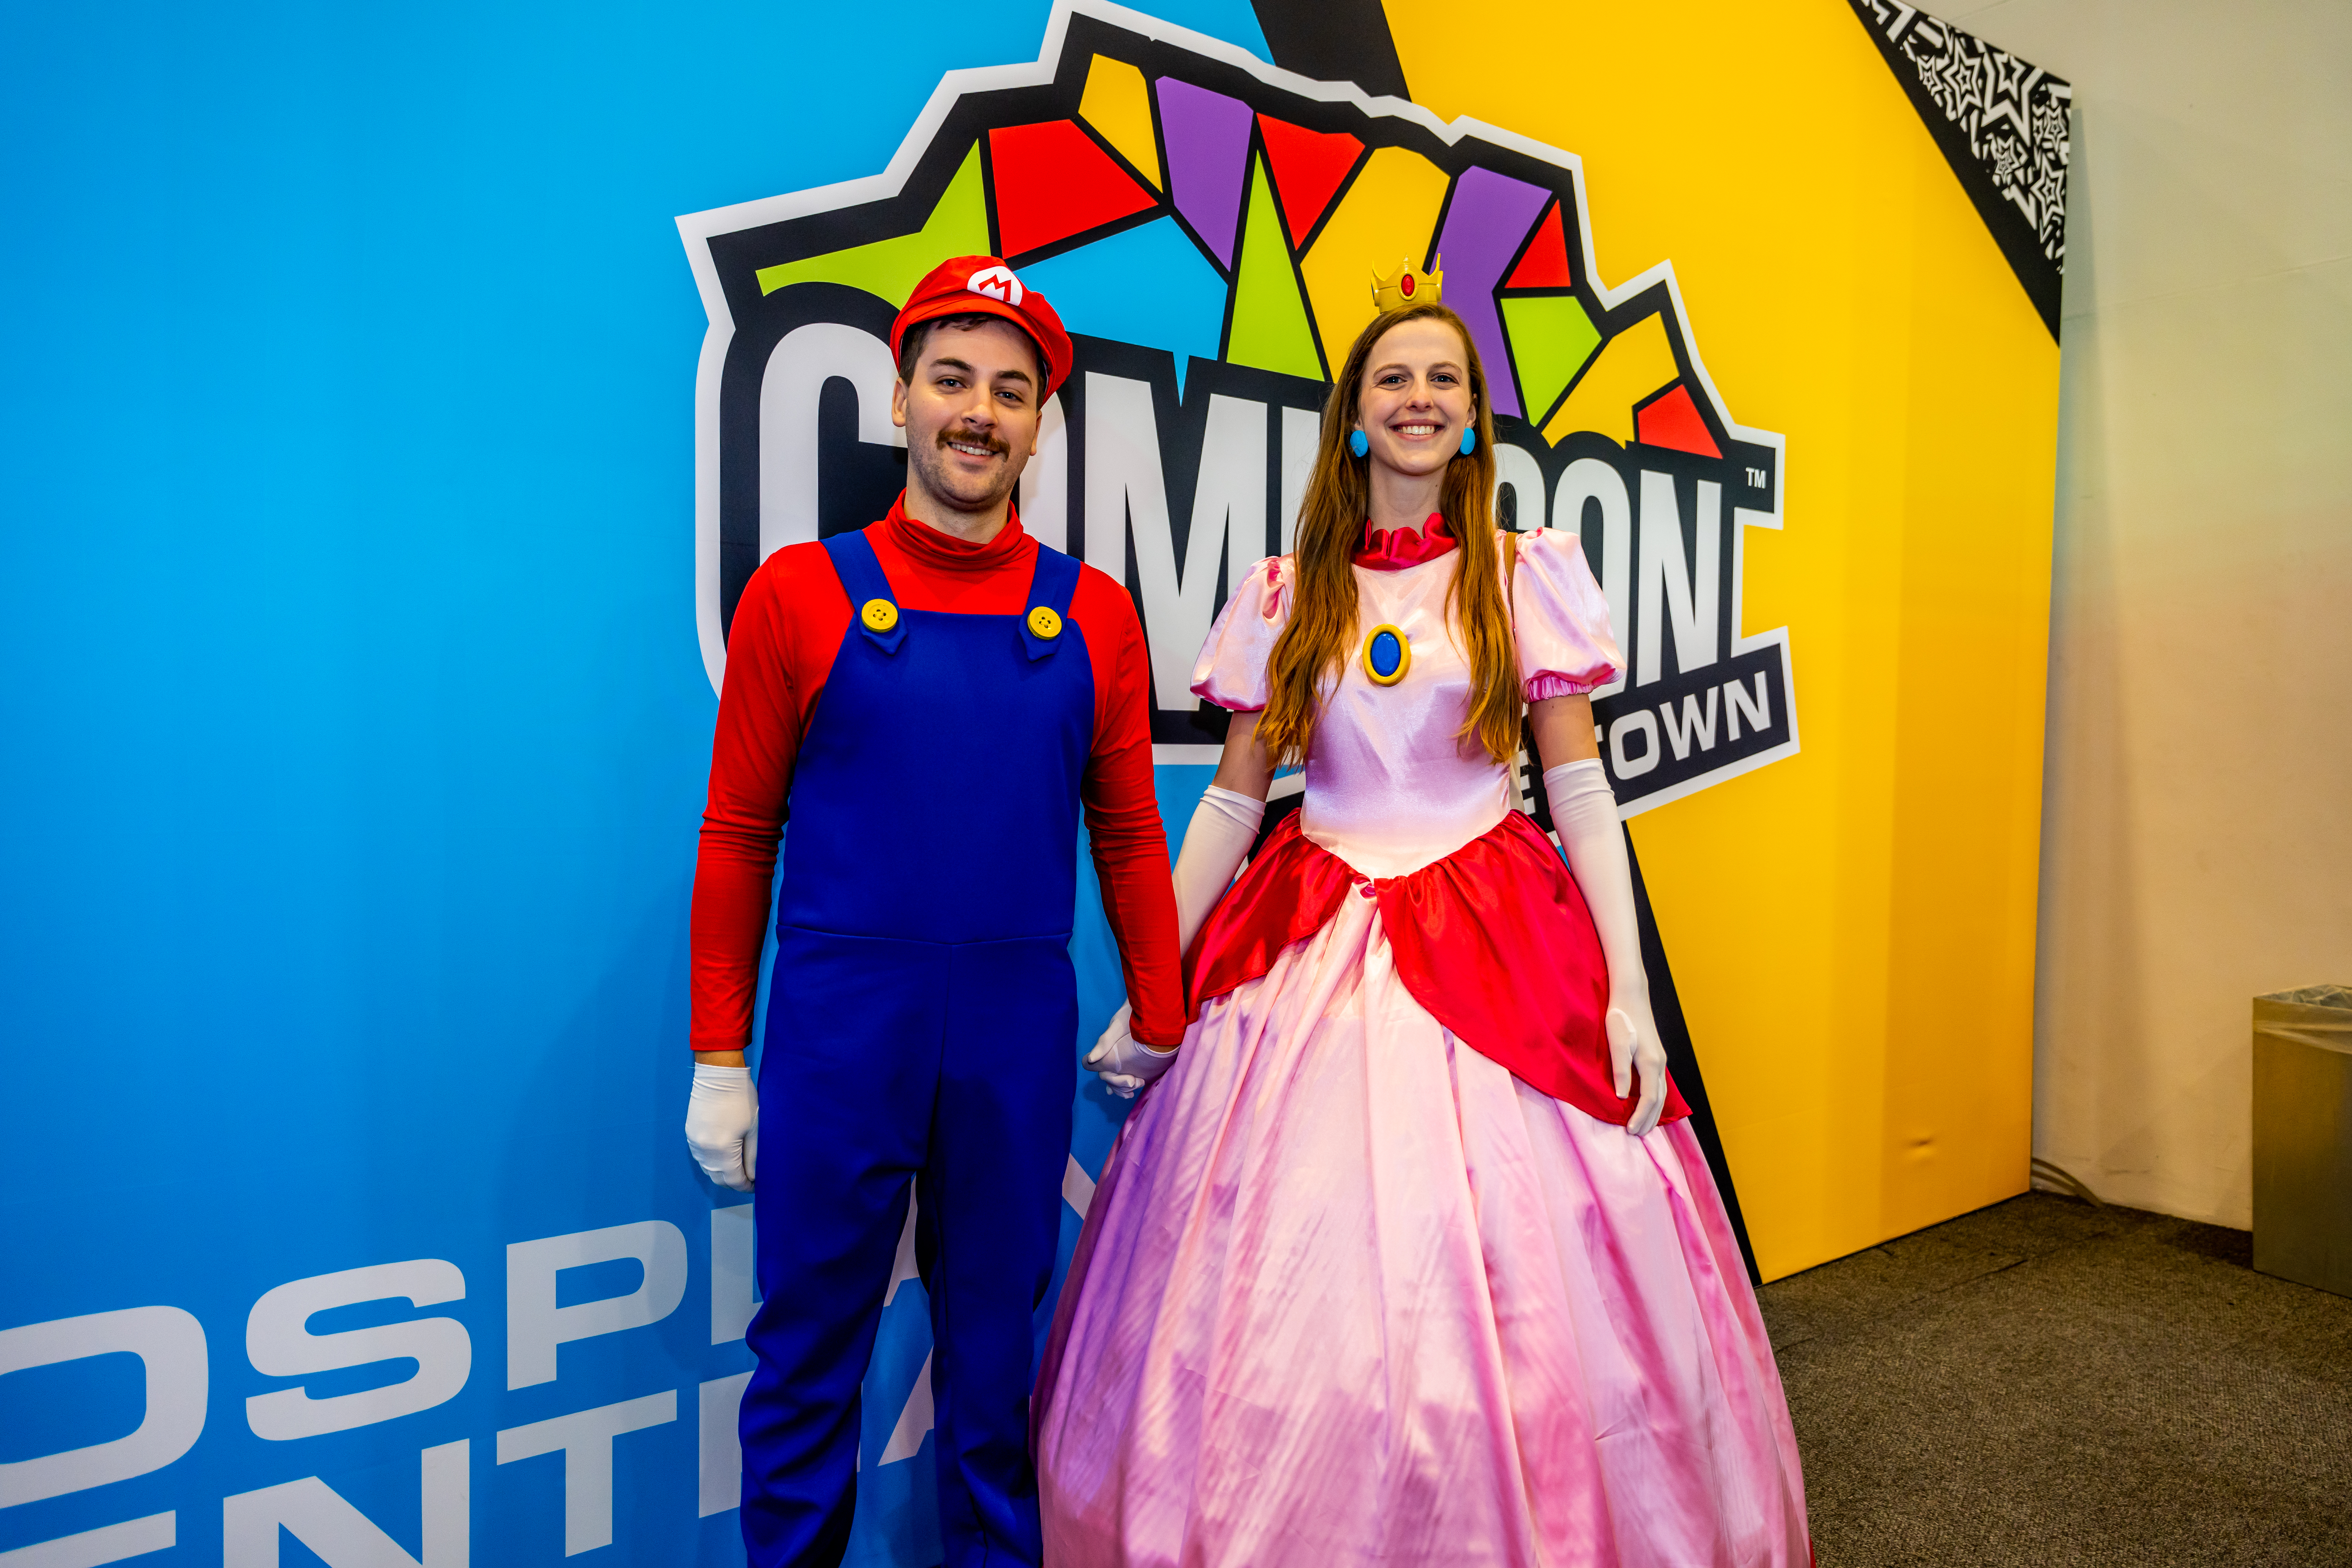 Cosplay of Mario and Princess Peach from Nintendo's Mario franchise at Comic Con Cape Town. Image: Matthew Sleep